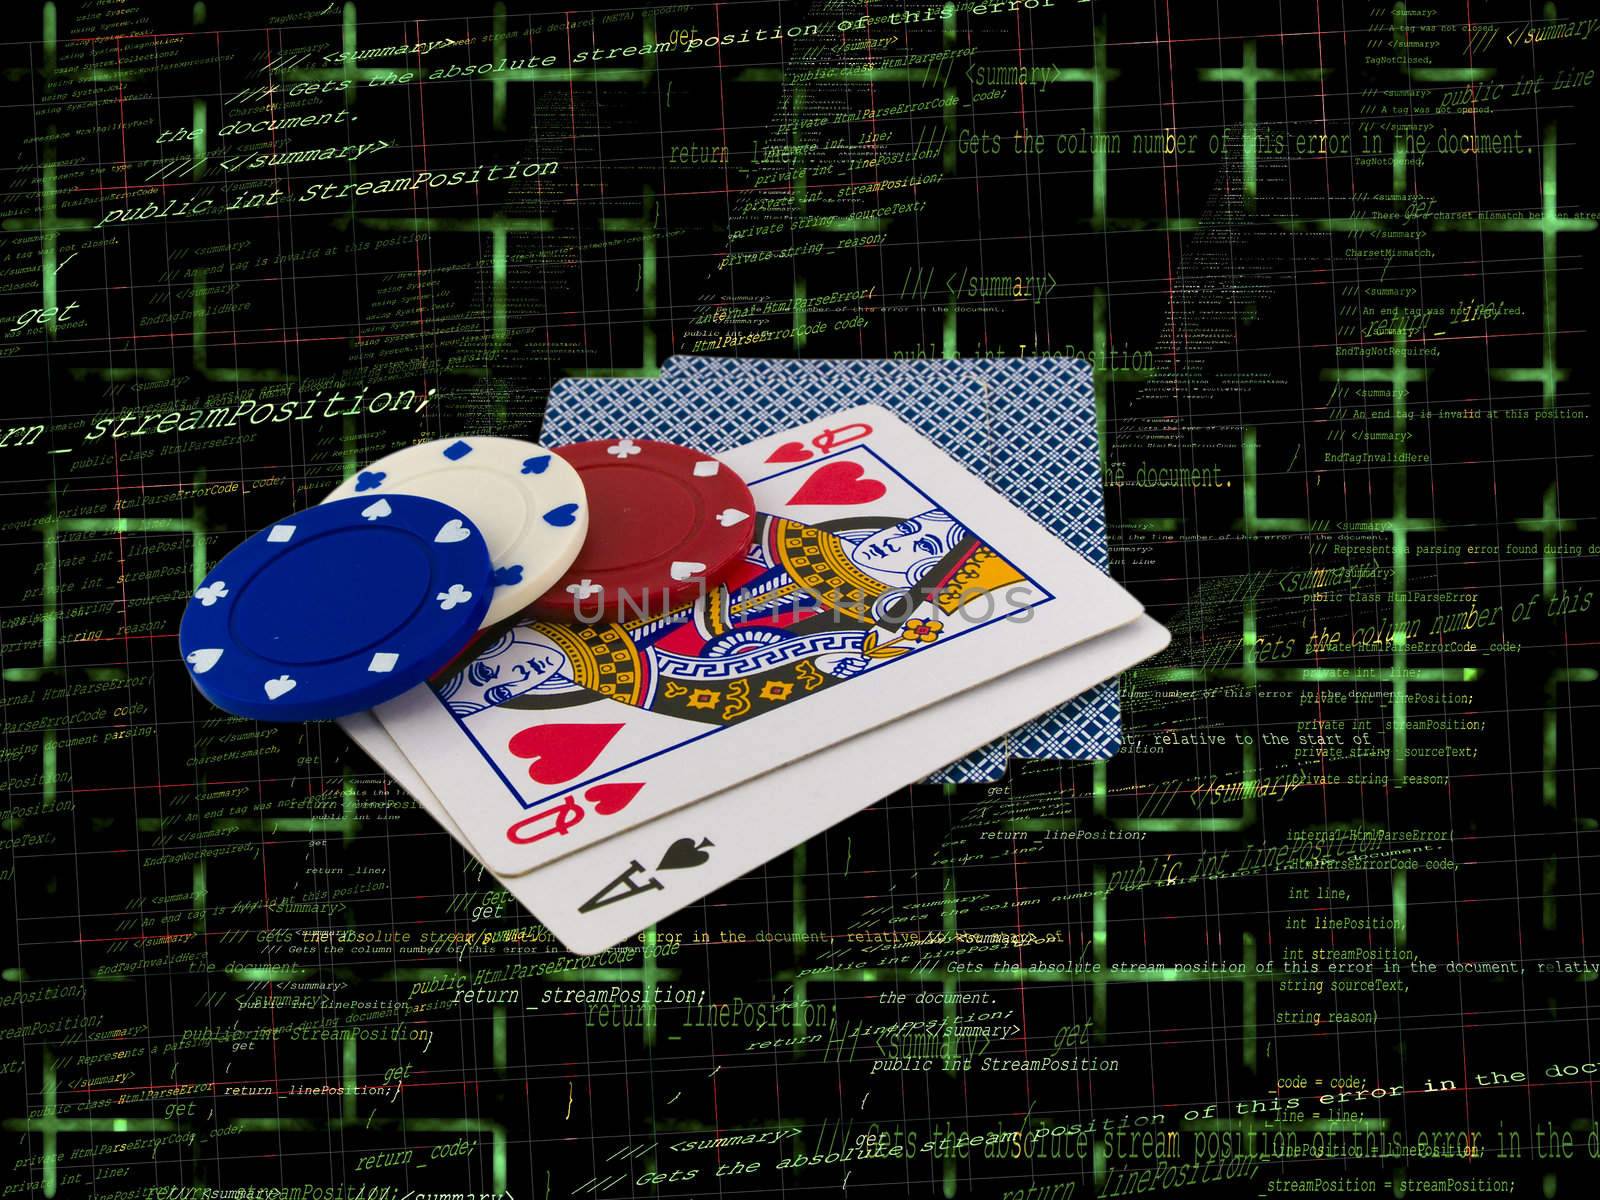 Playing Cards Queen and Ace with Poker Chips over Programming Source Code